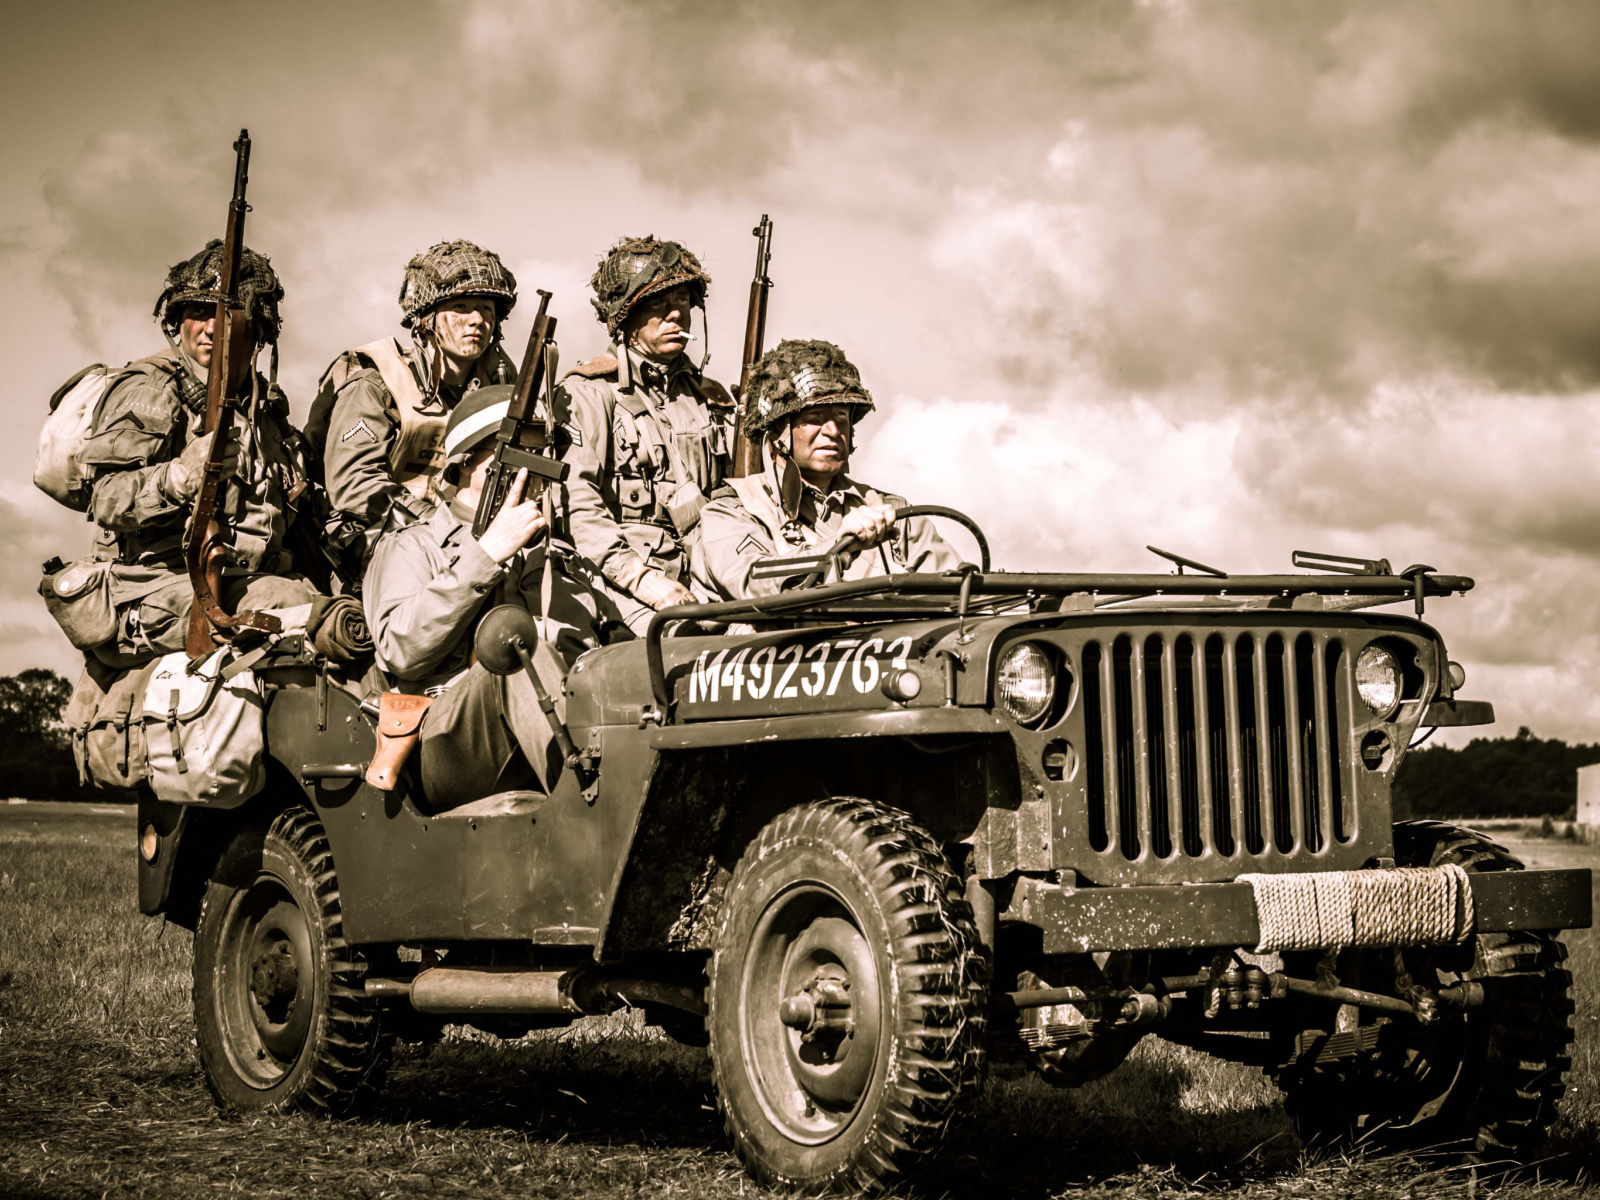 Das Soldiers on Jeep Wallpaper 1600x1200